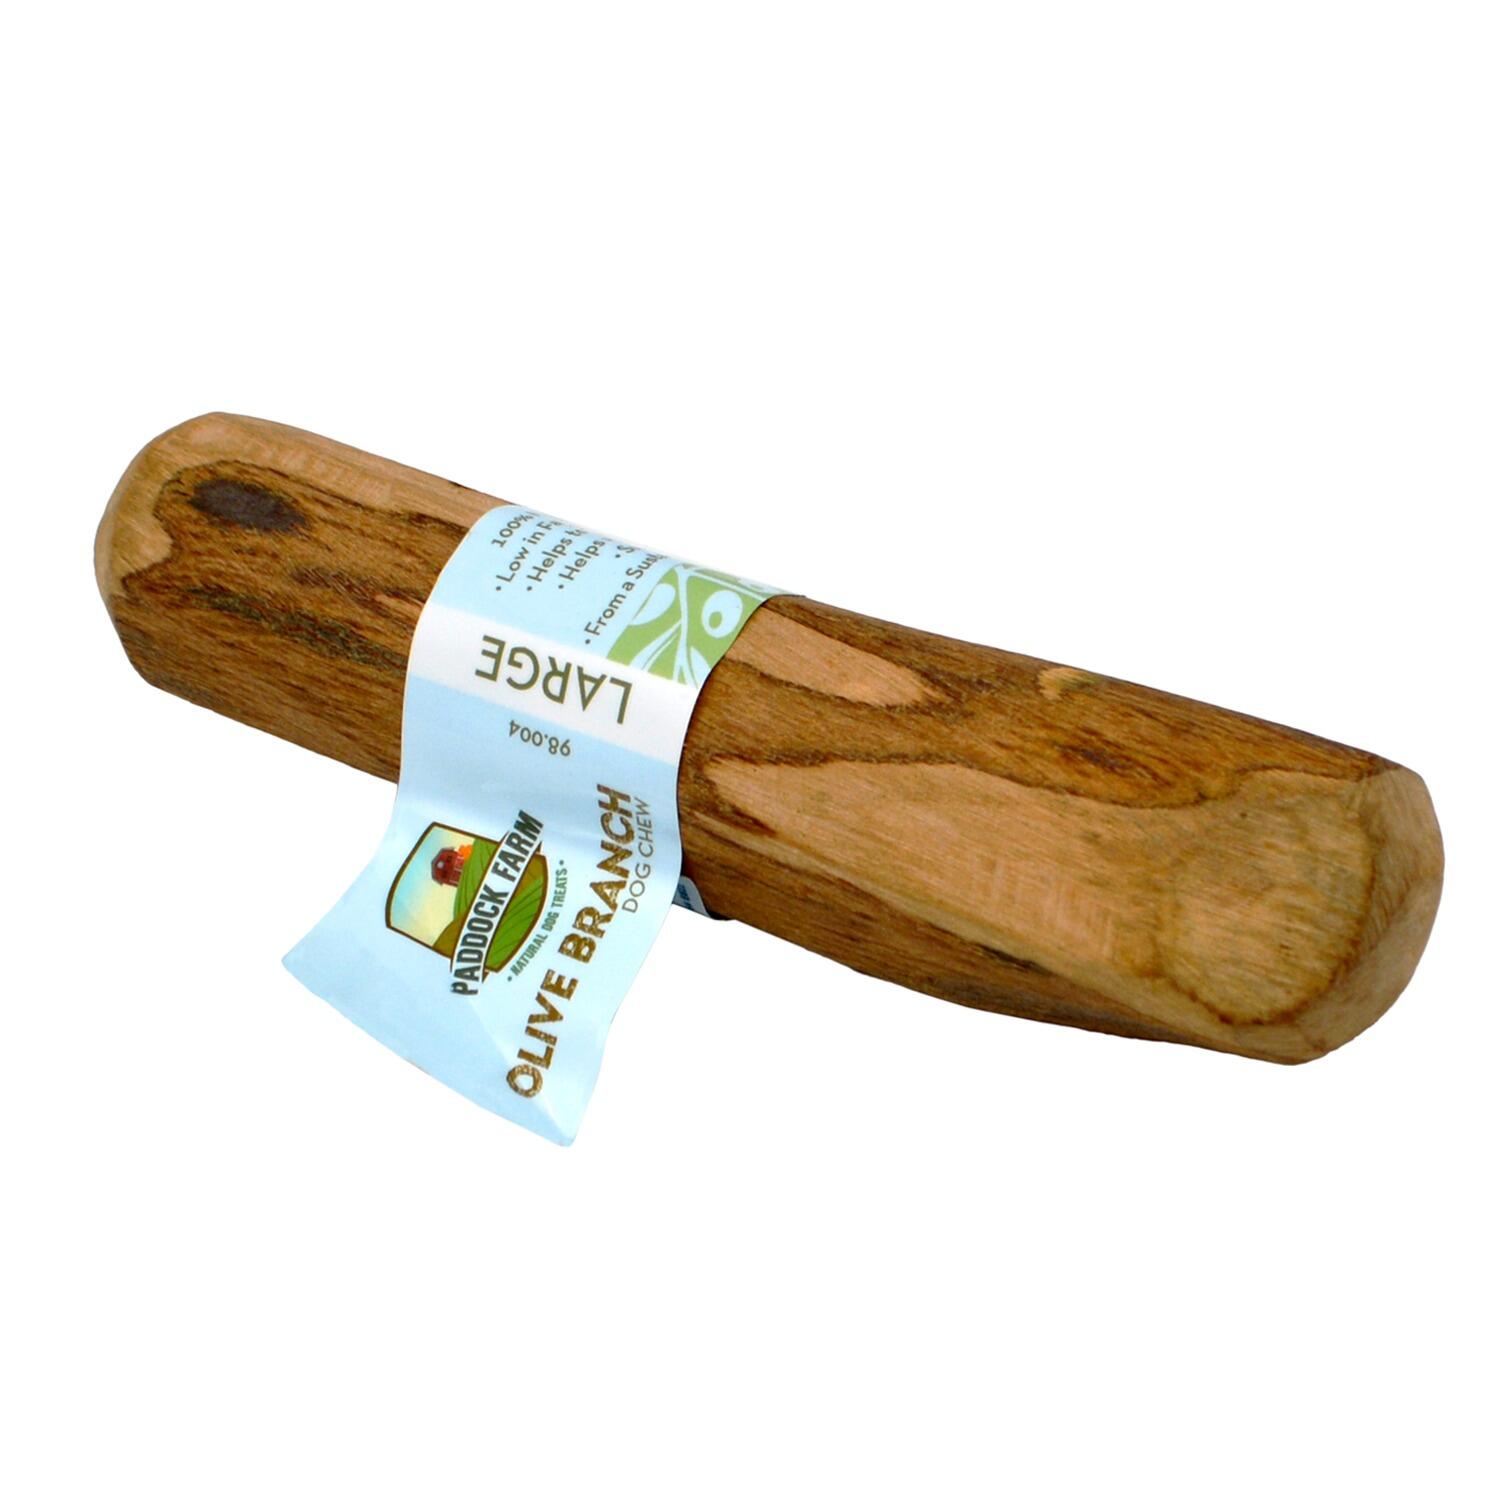 Large Olive Wood Dog Chew from Paddock Farm